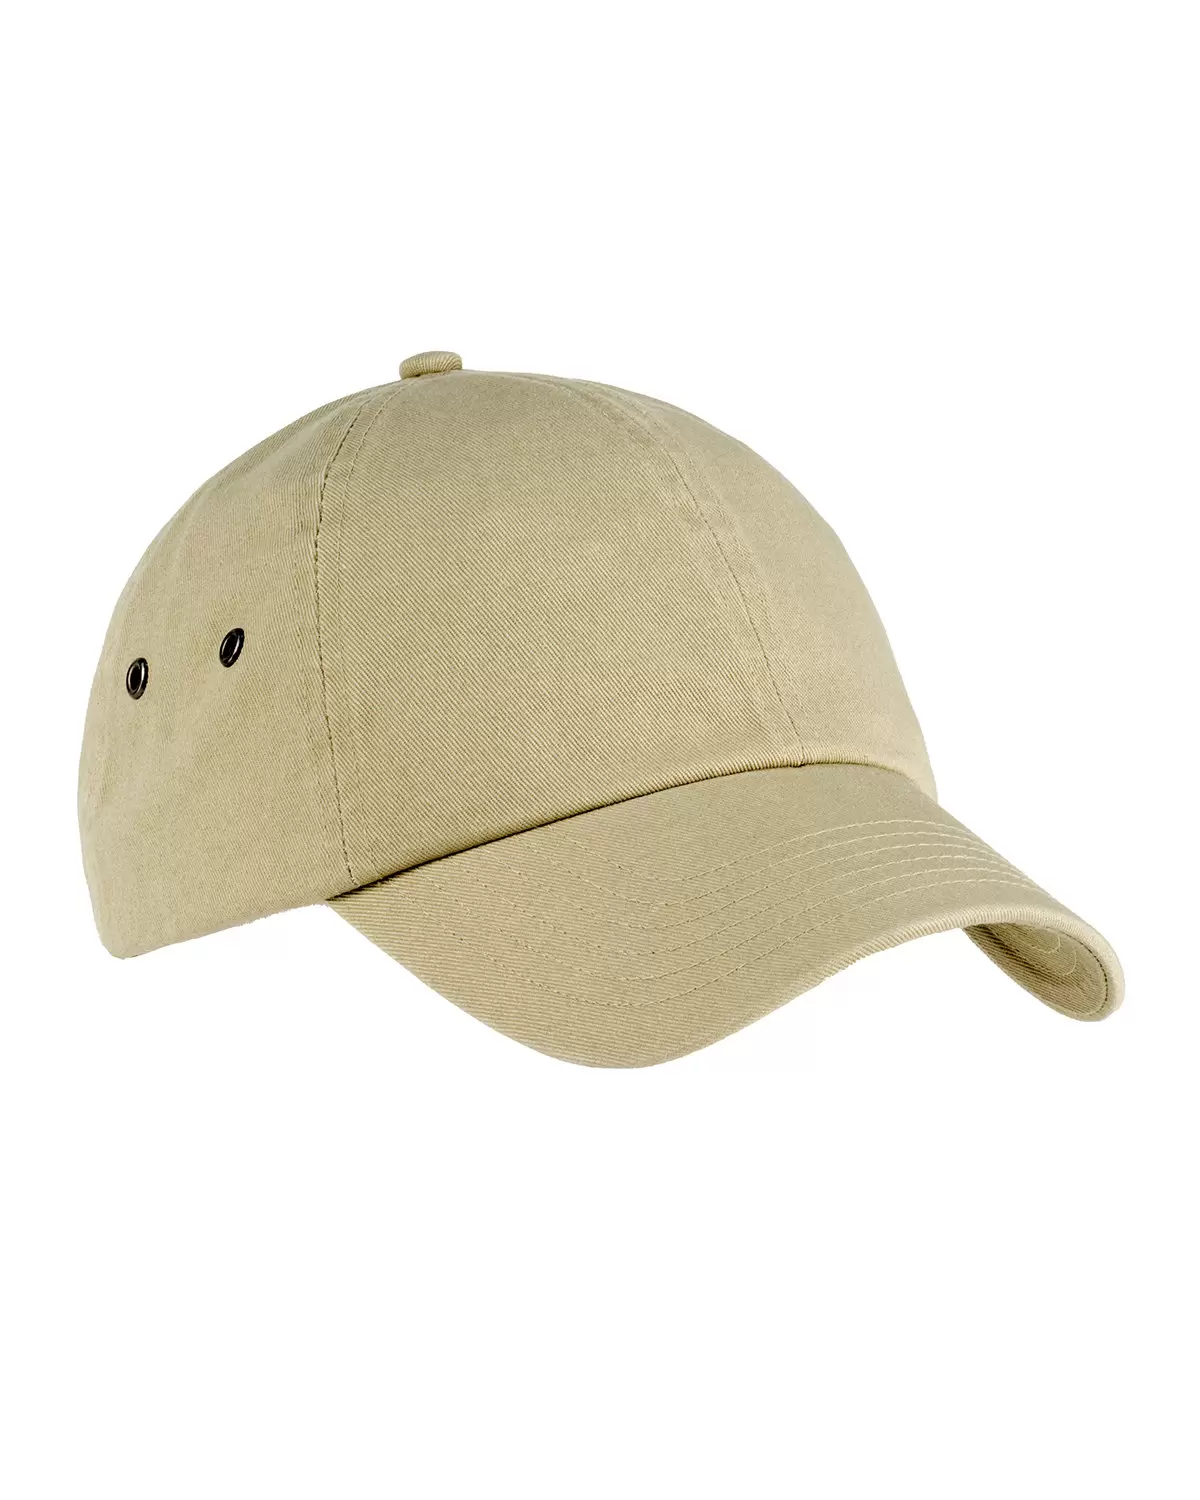 - Washed Cap Accessories Big Baseball BA529 From